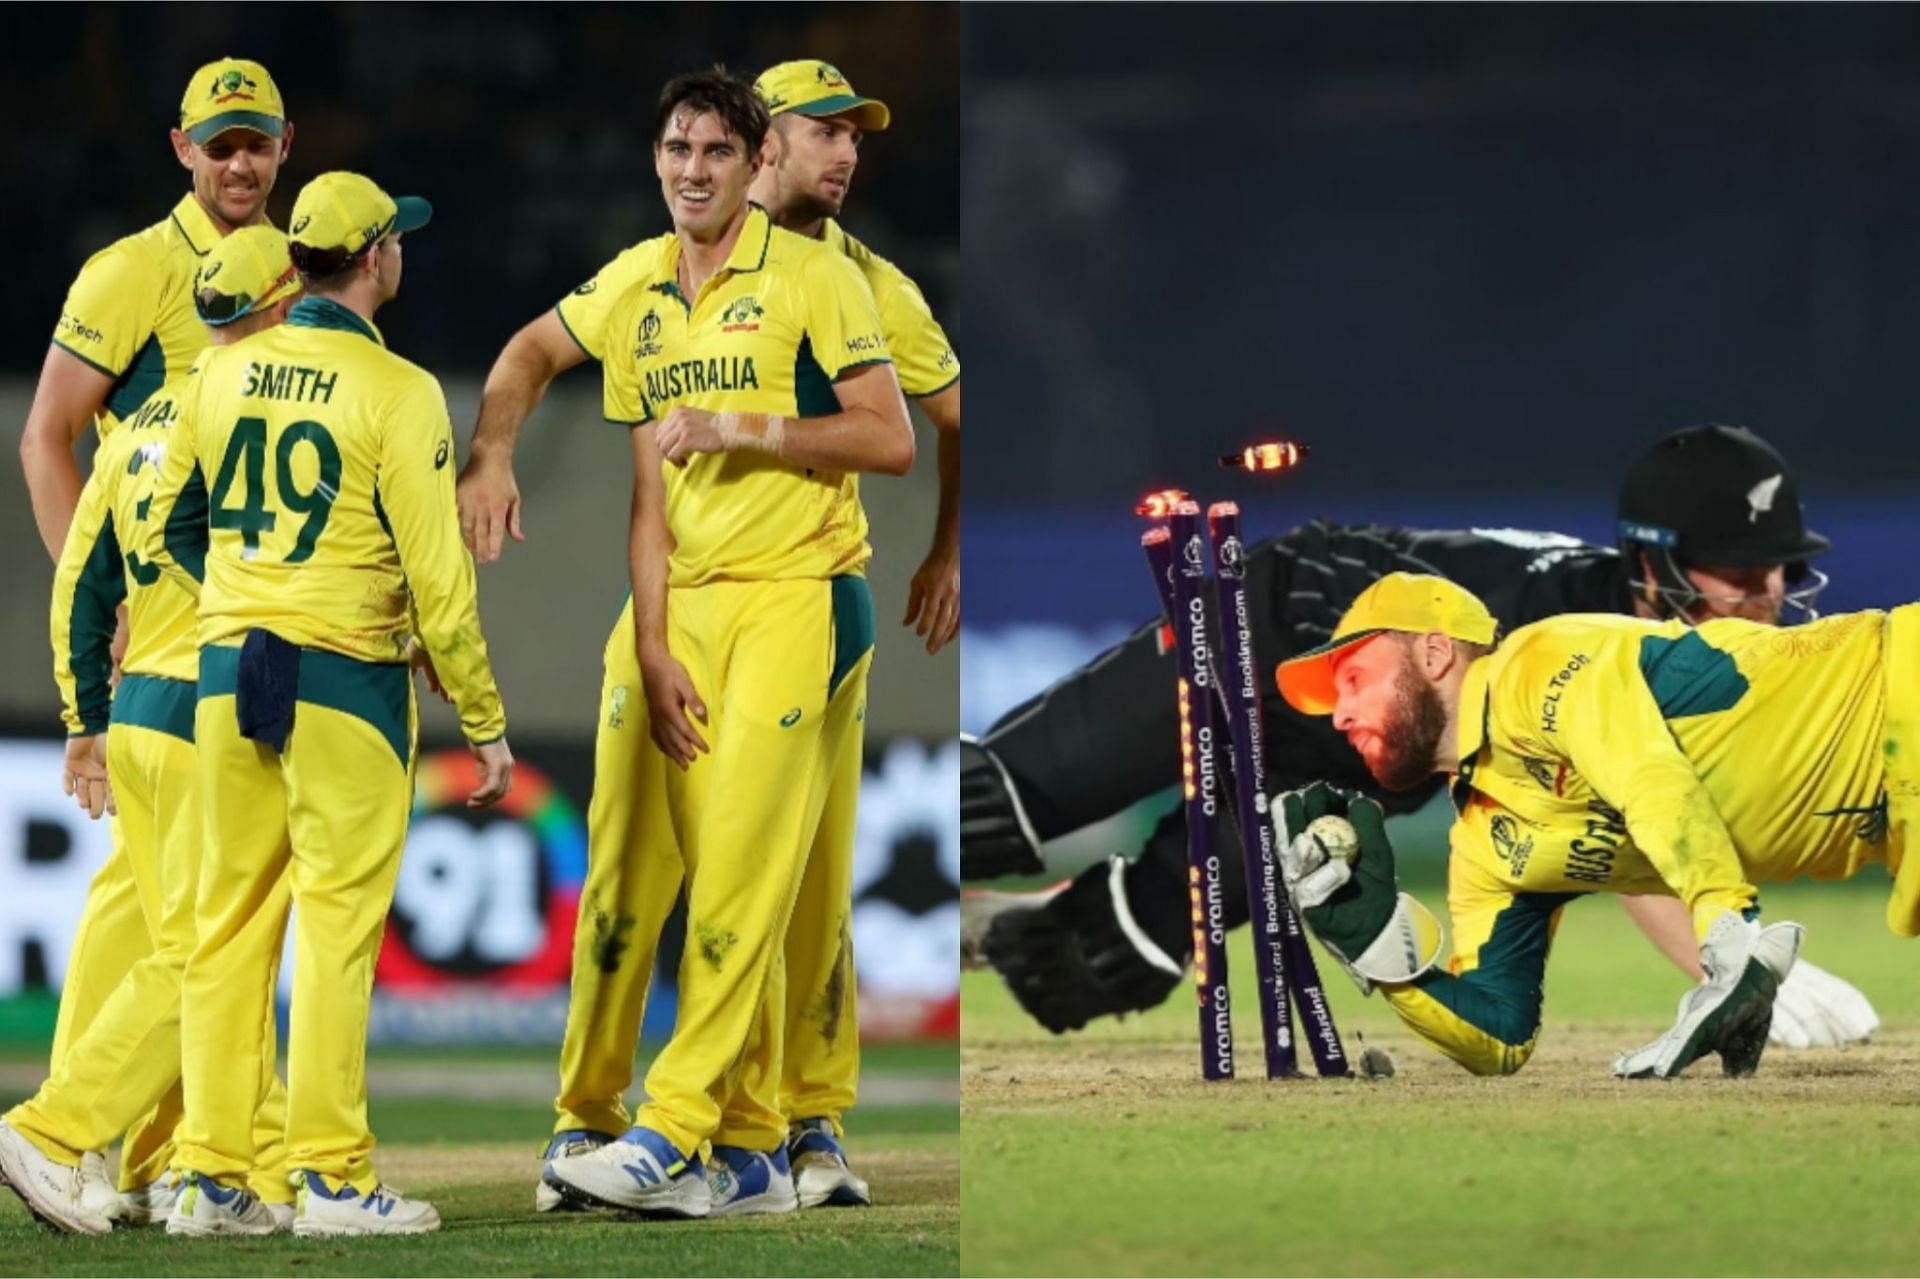 Australia beat New Zealand by 5 runs on Saturday [Getty images]